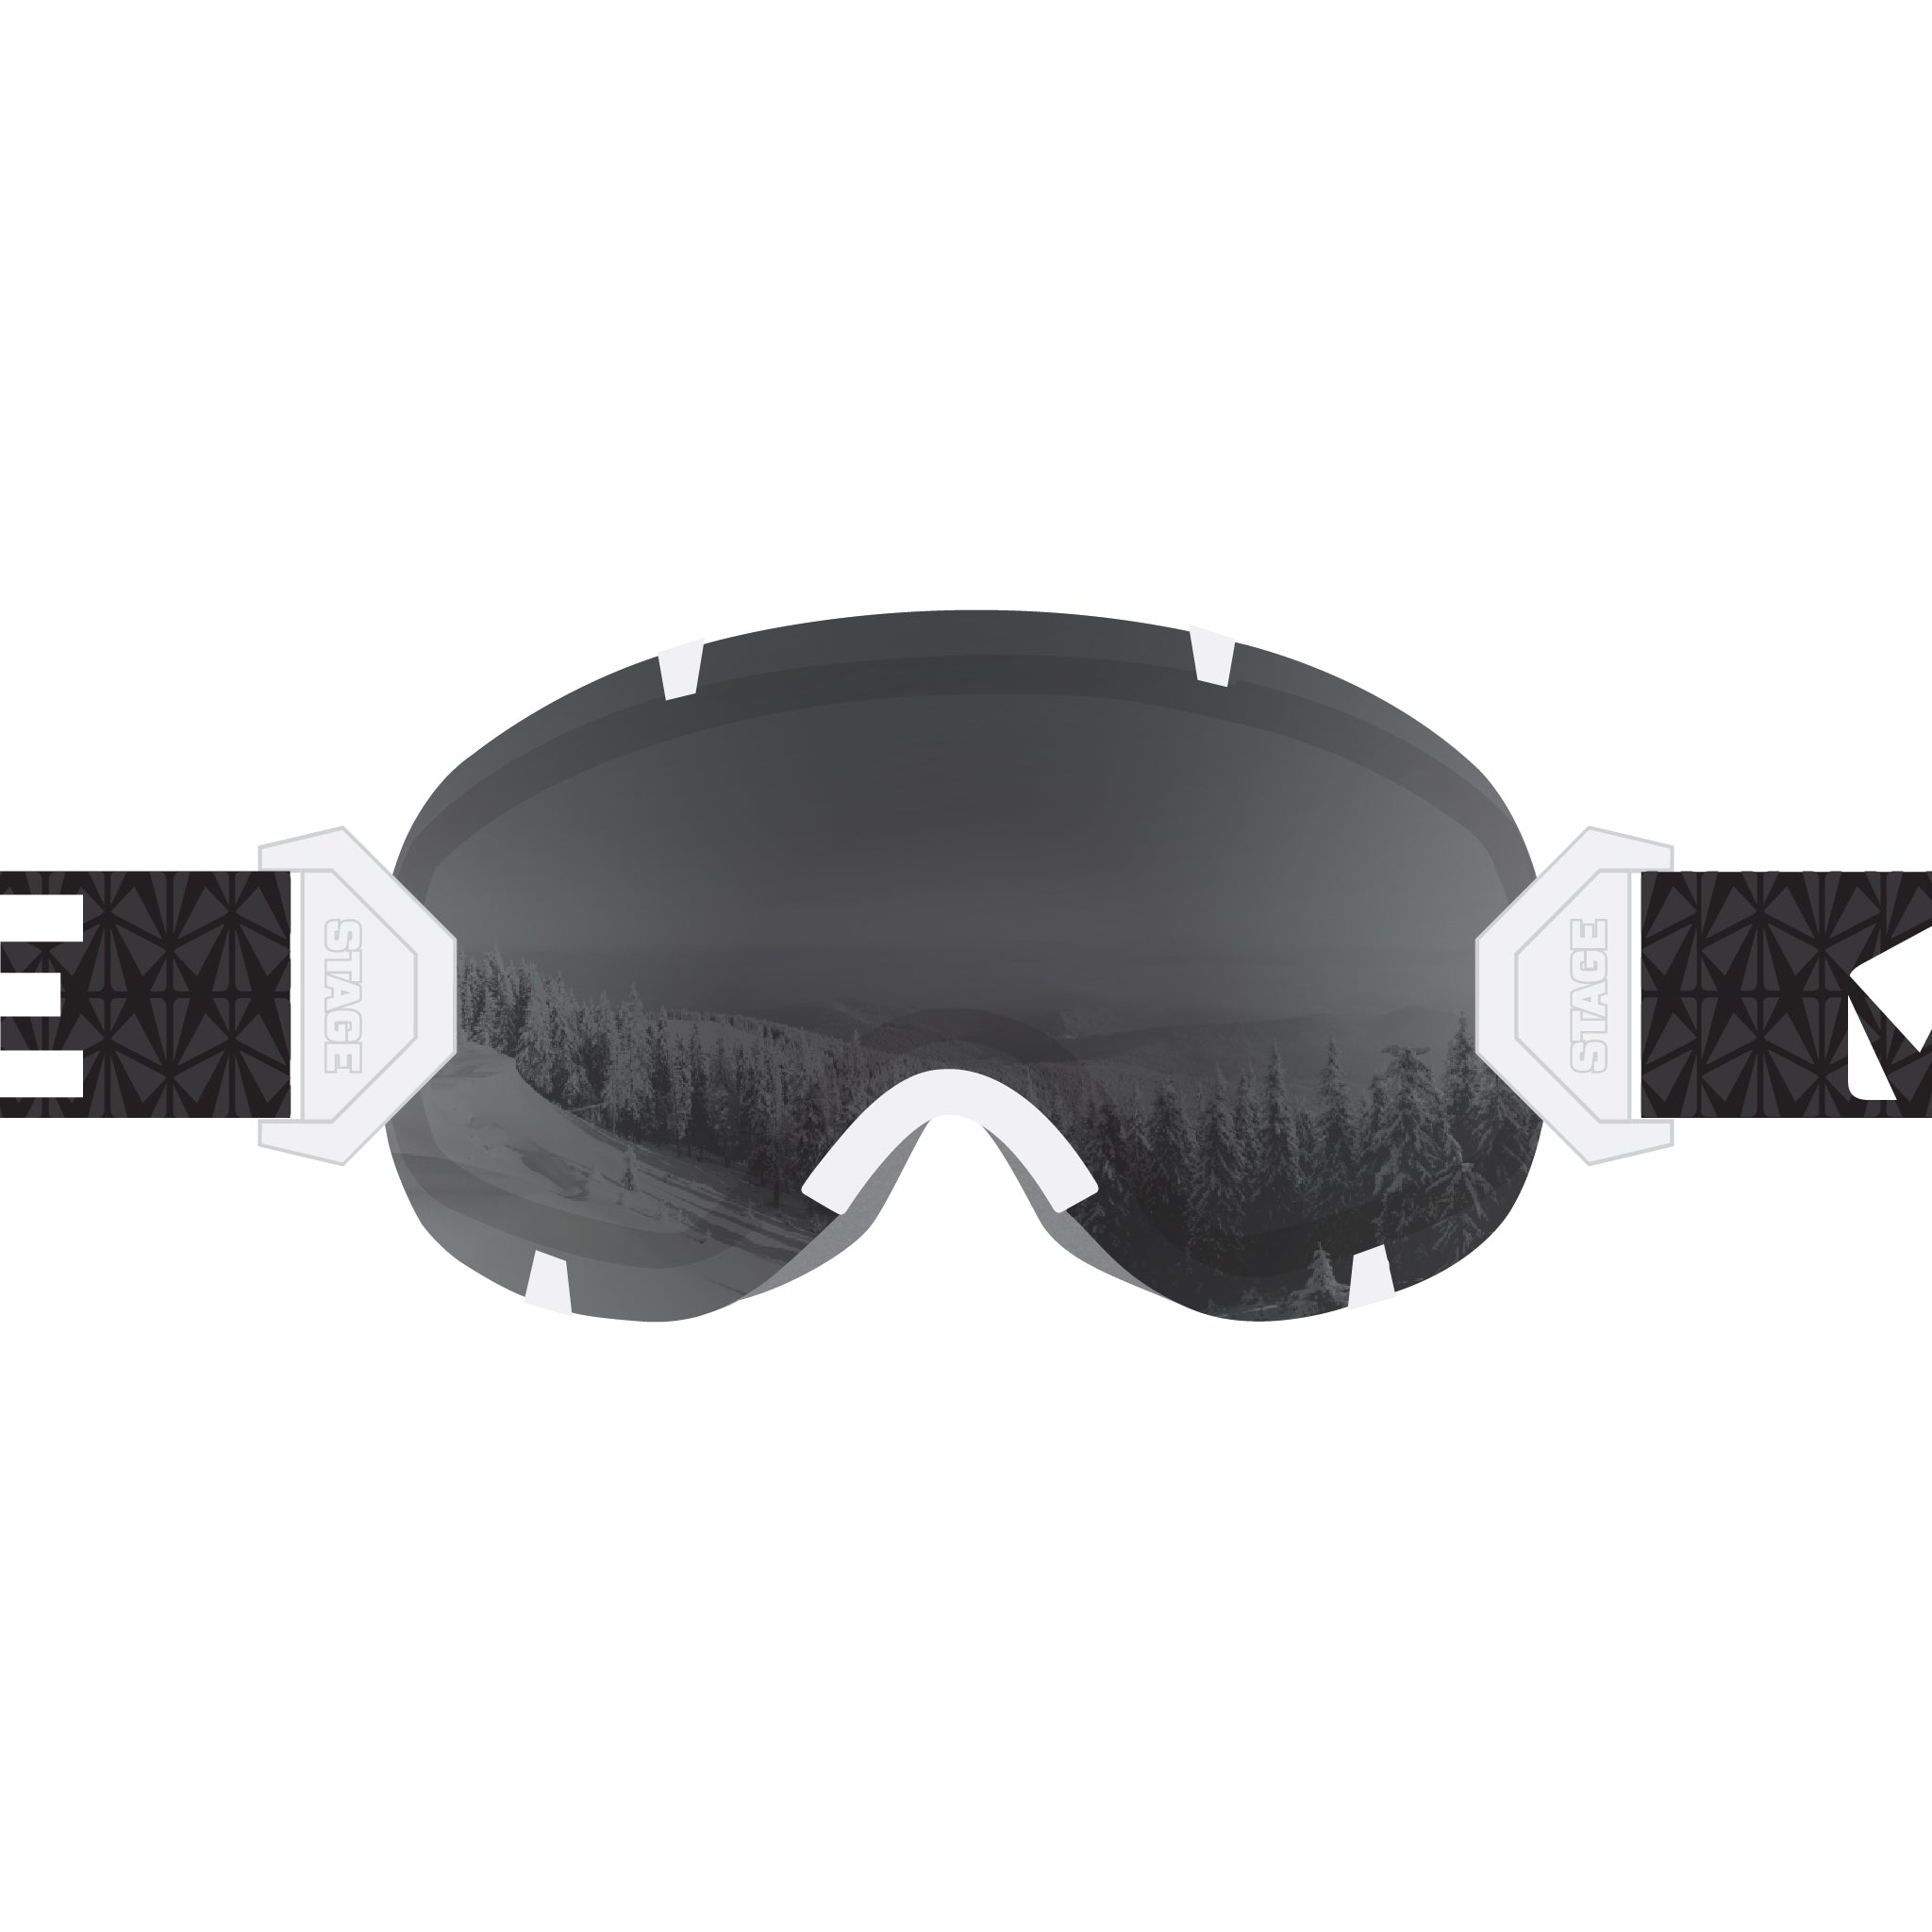 STAGE Stunt Ski Goggle - and - Interchangeable Strap Lens Black